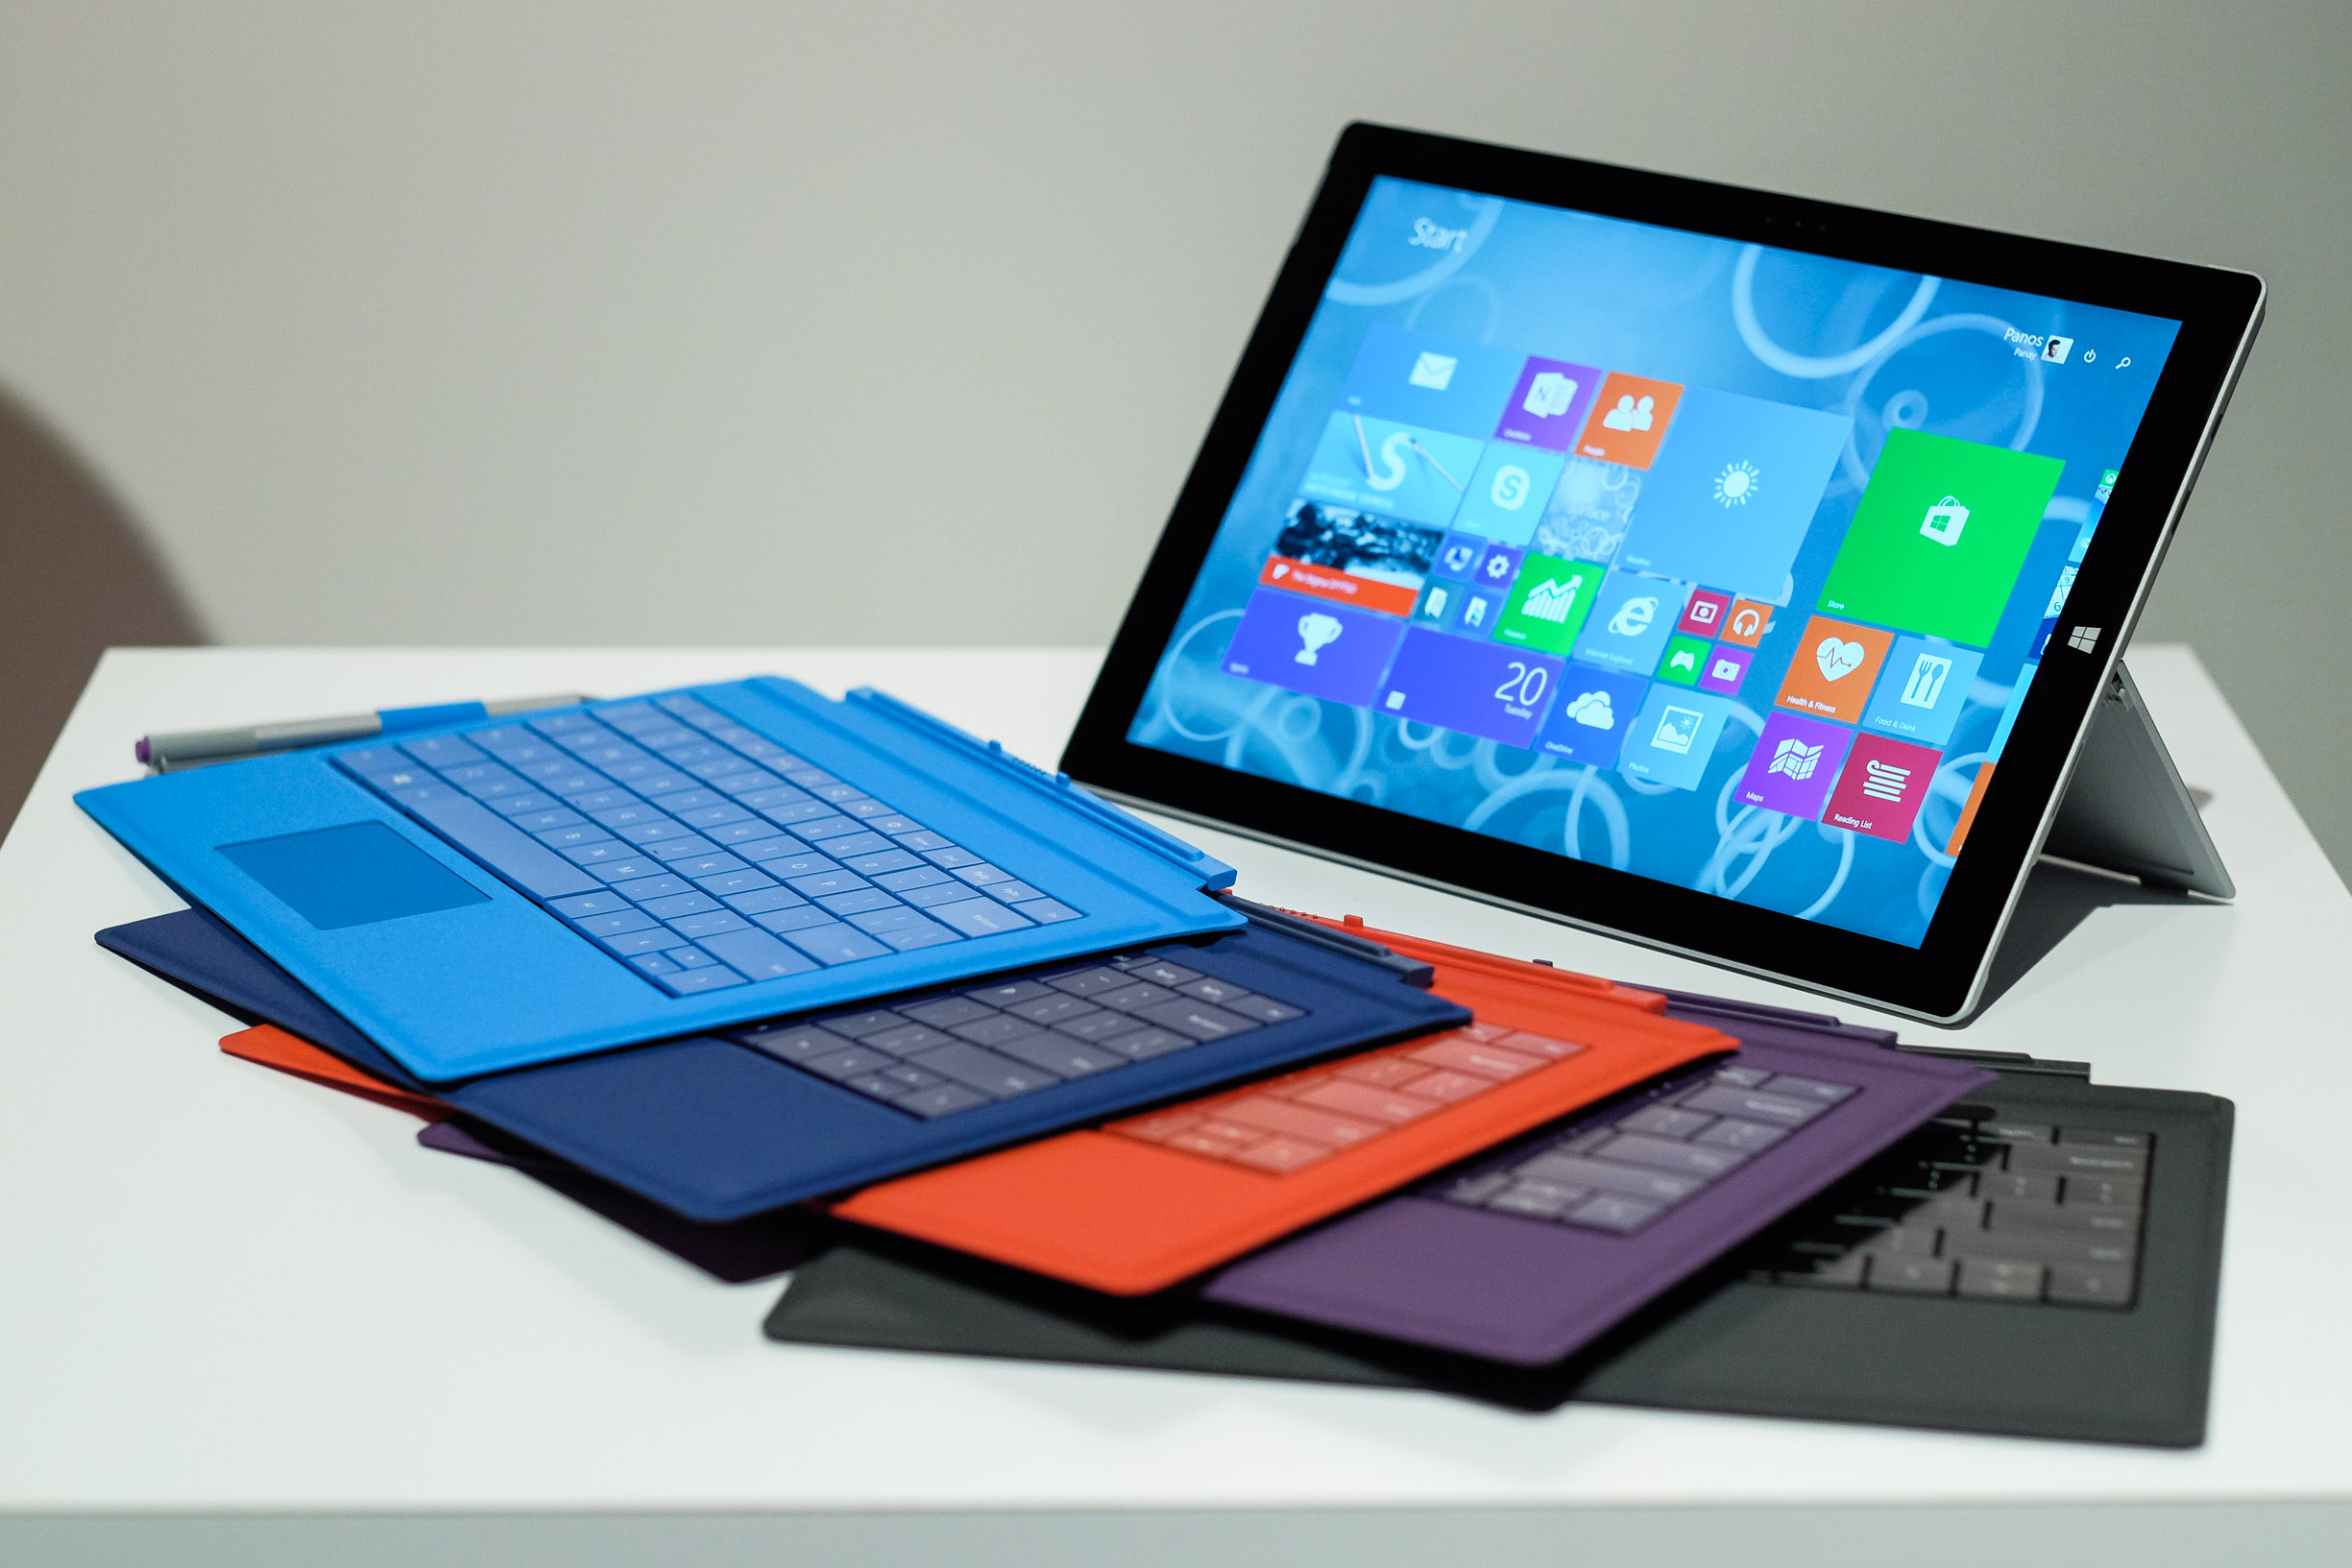 Surface Pro 3 software, firmware, and drivers - microsoftcom